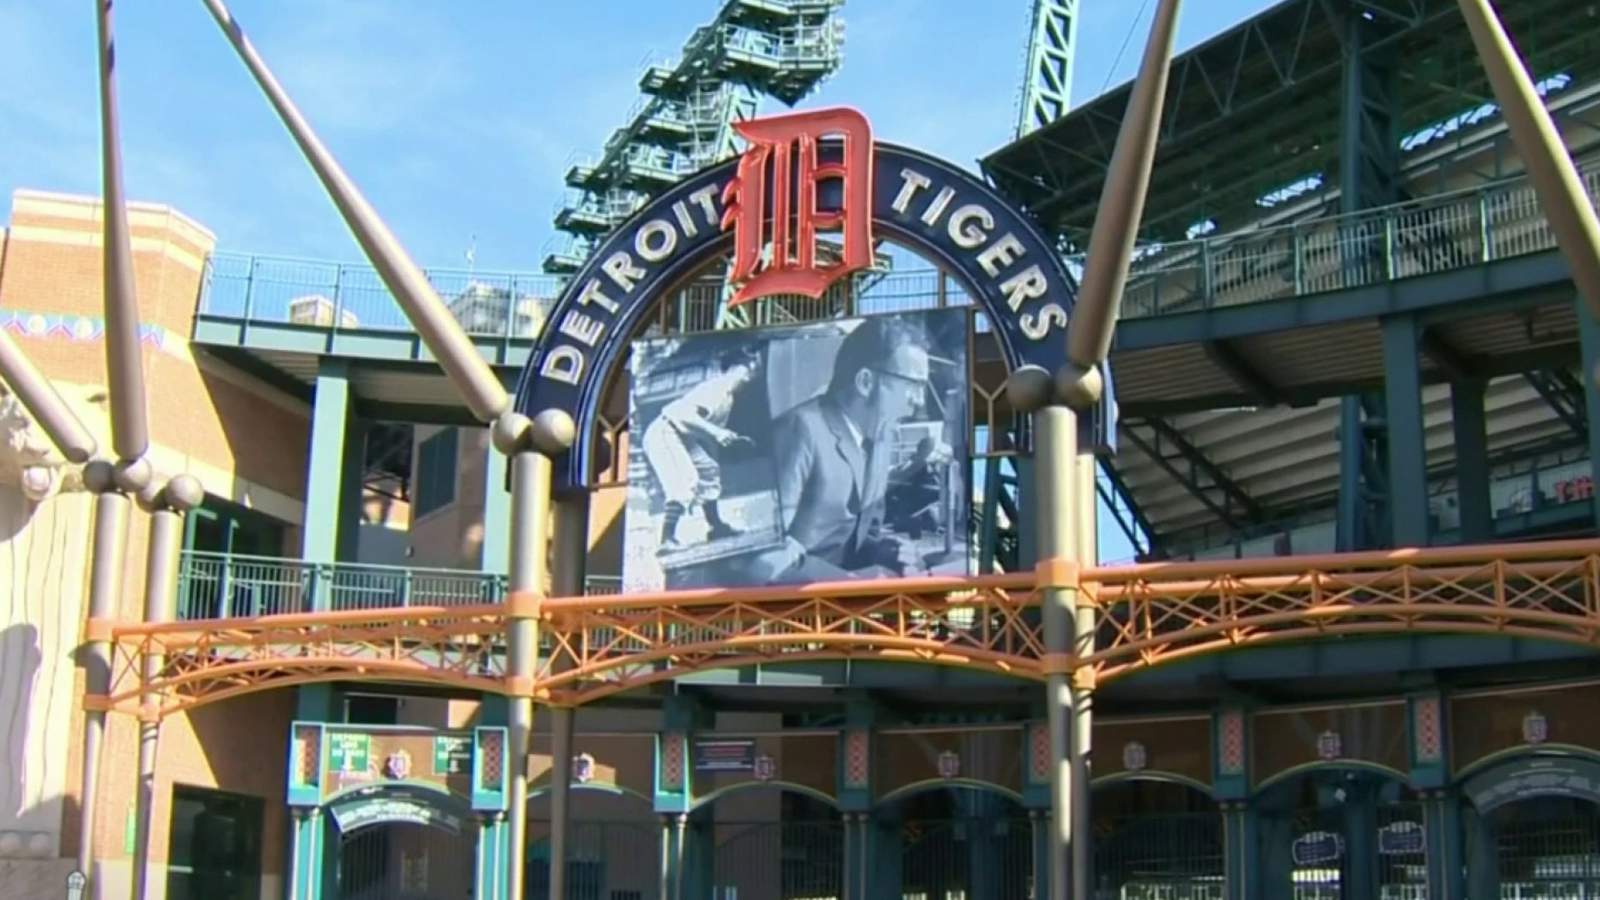 How many fans will be allowed inside Comerica Park on Opening Day?